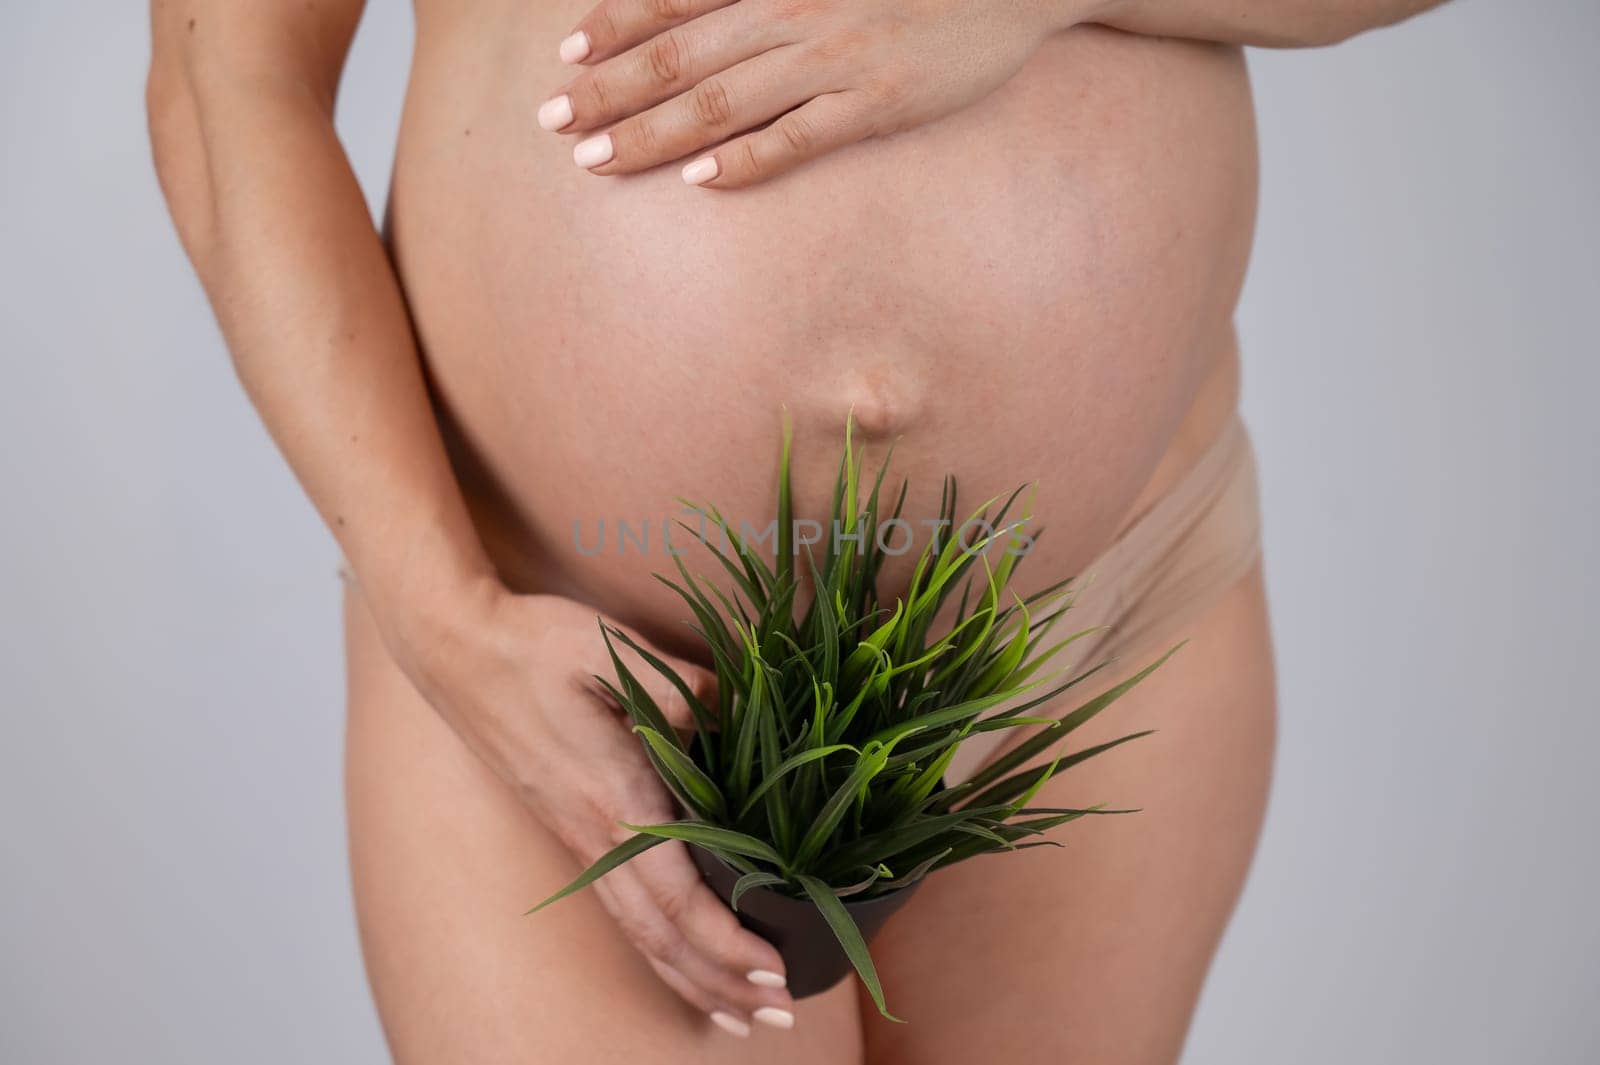 Faceless pregnant woman holding a plant. Metaphor for epilation of the bikini area. by mrwed54